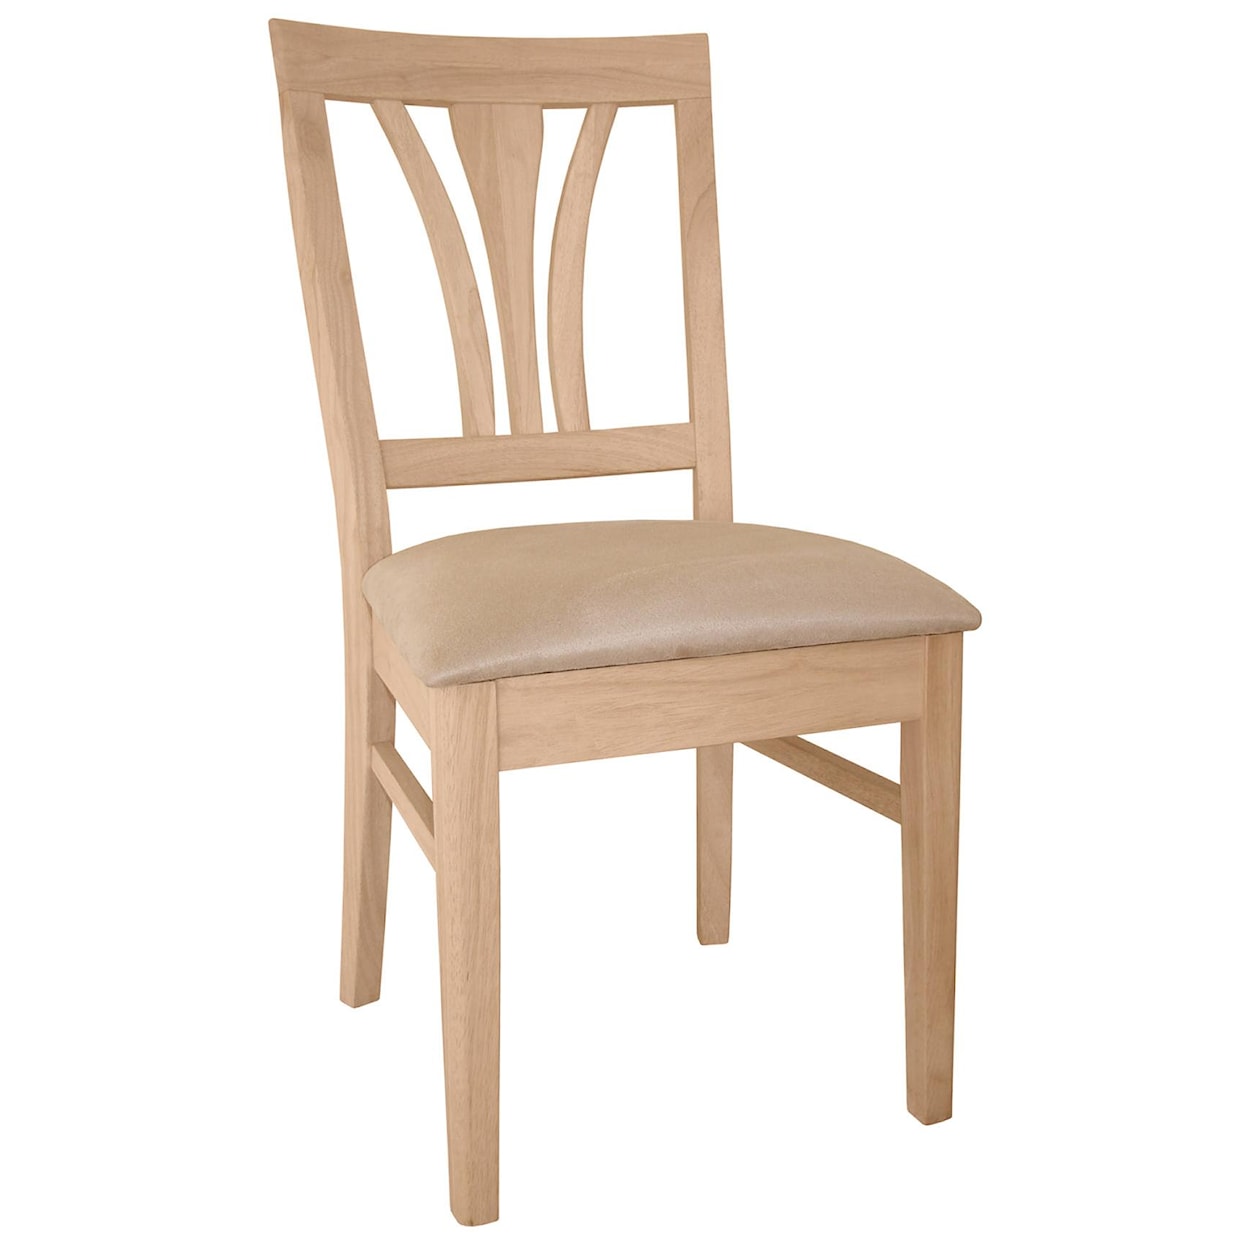 John Thomas SELECT Dining Room Fanback Chair with Seat Cushion